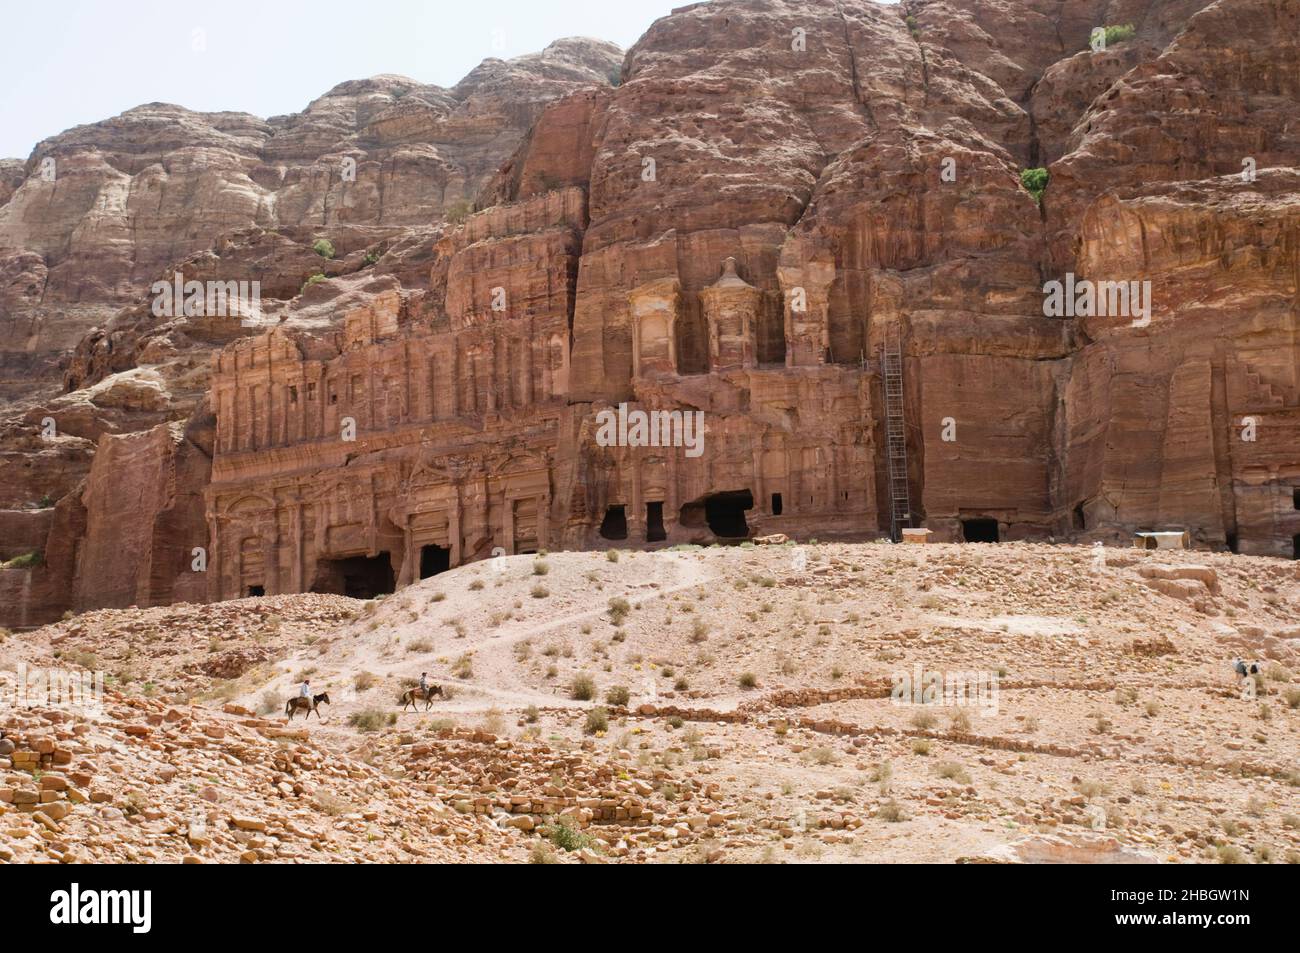 Middle East, Jordan, Petra, UNESCO World Heritage Site. The Royal Tombs carved in the mountain side of Jabal Al-Khubtha Stock Photo